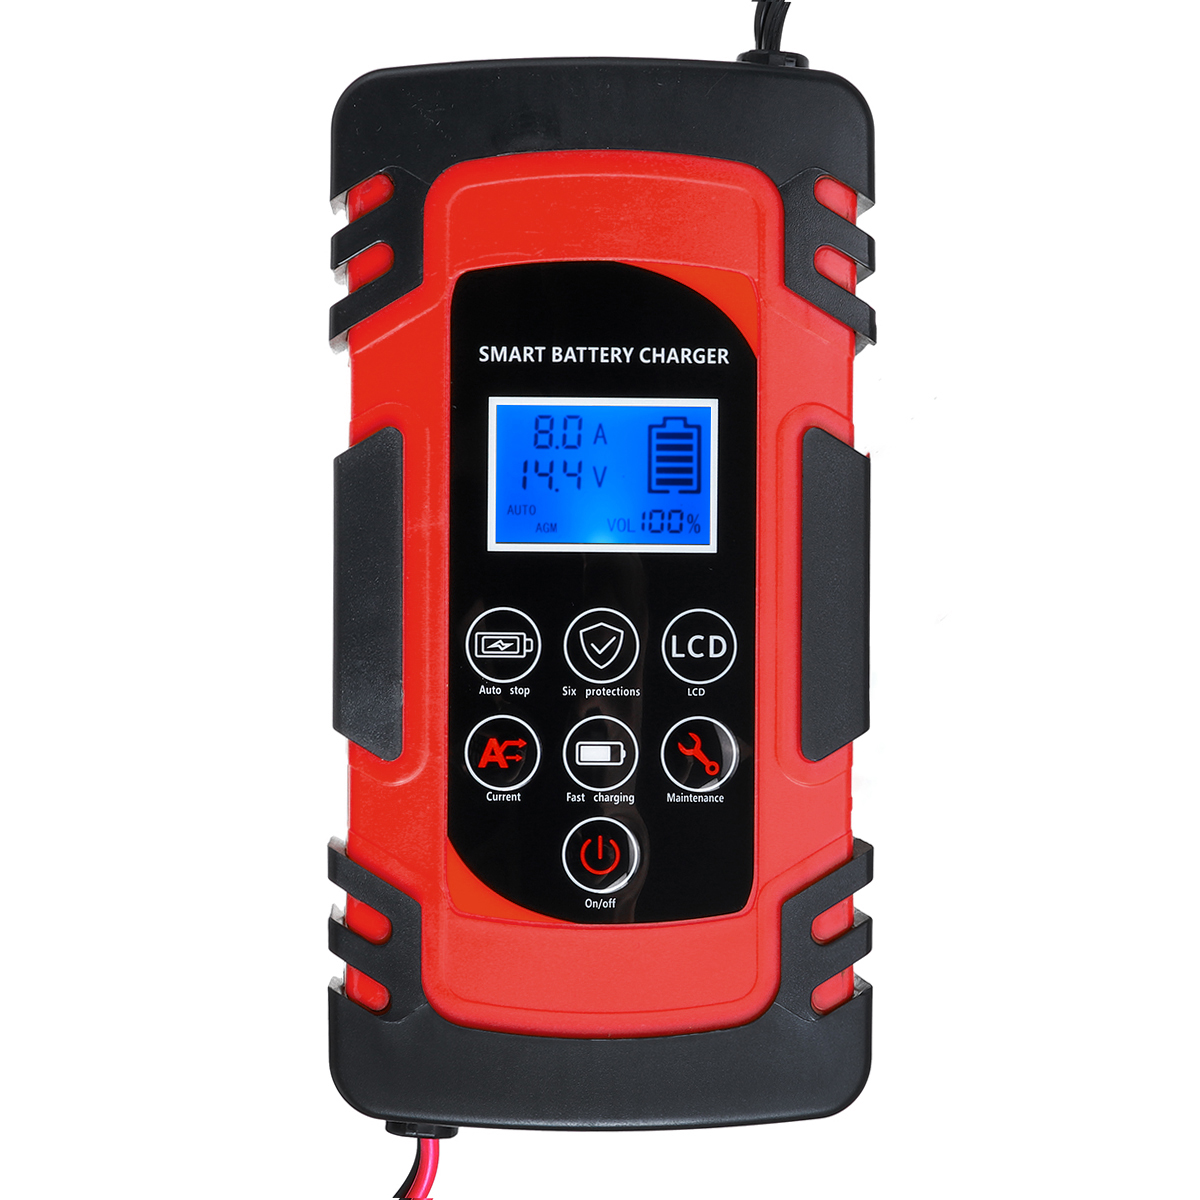 12V 24V 100W 4A/6A/8A Pulse Repair LCD Battery Charger for Car Motorcycle Lead Acid Agm Gel Wet Battery